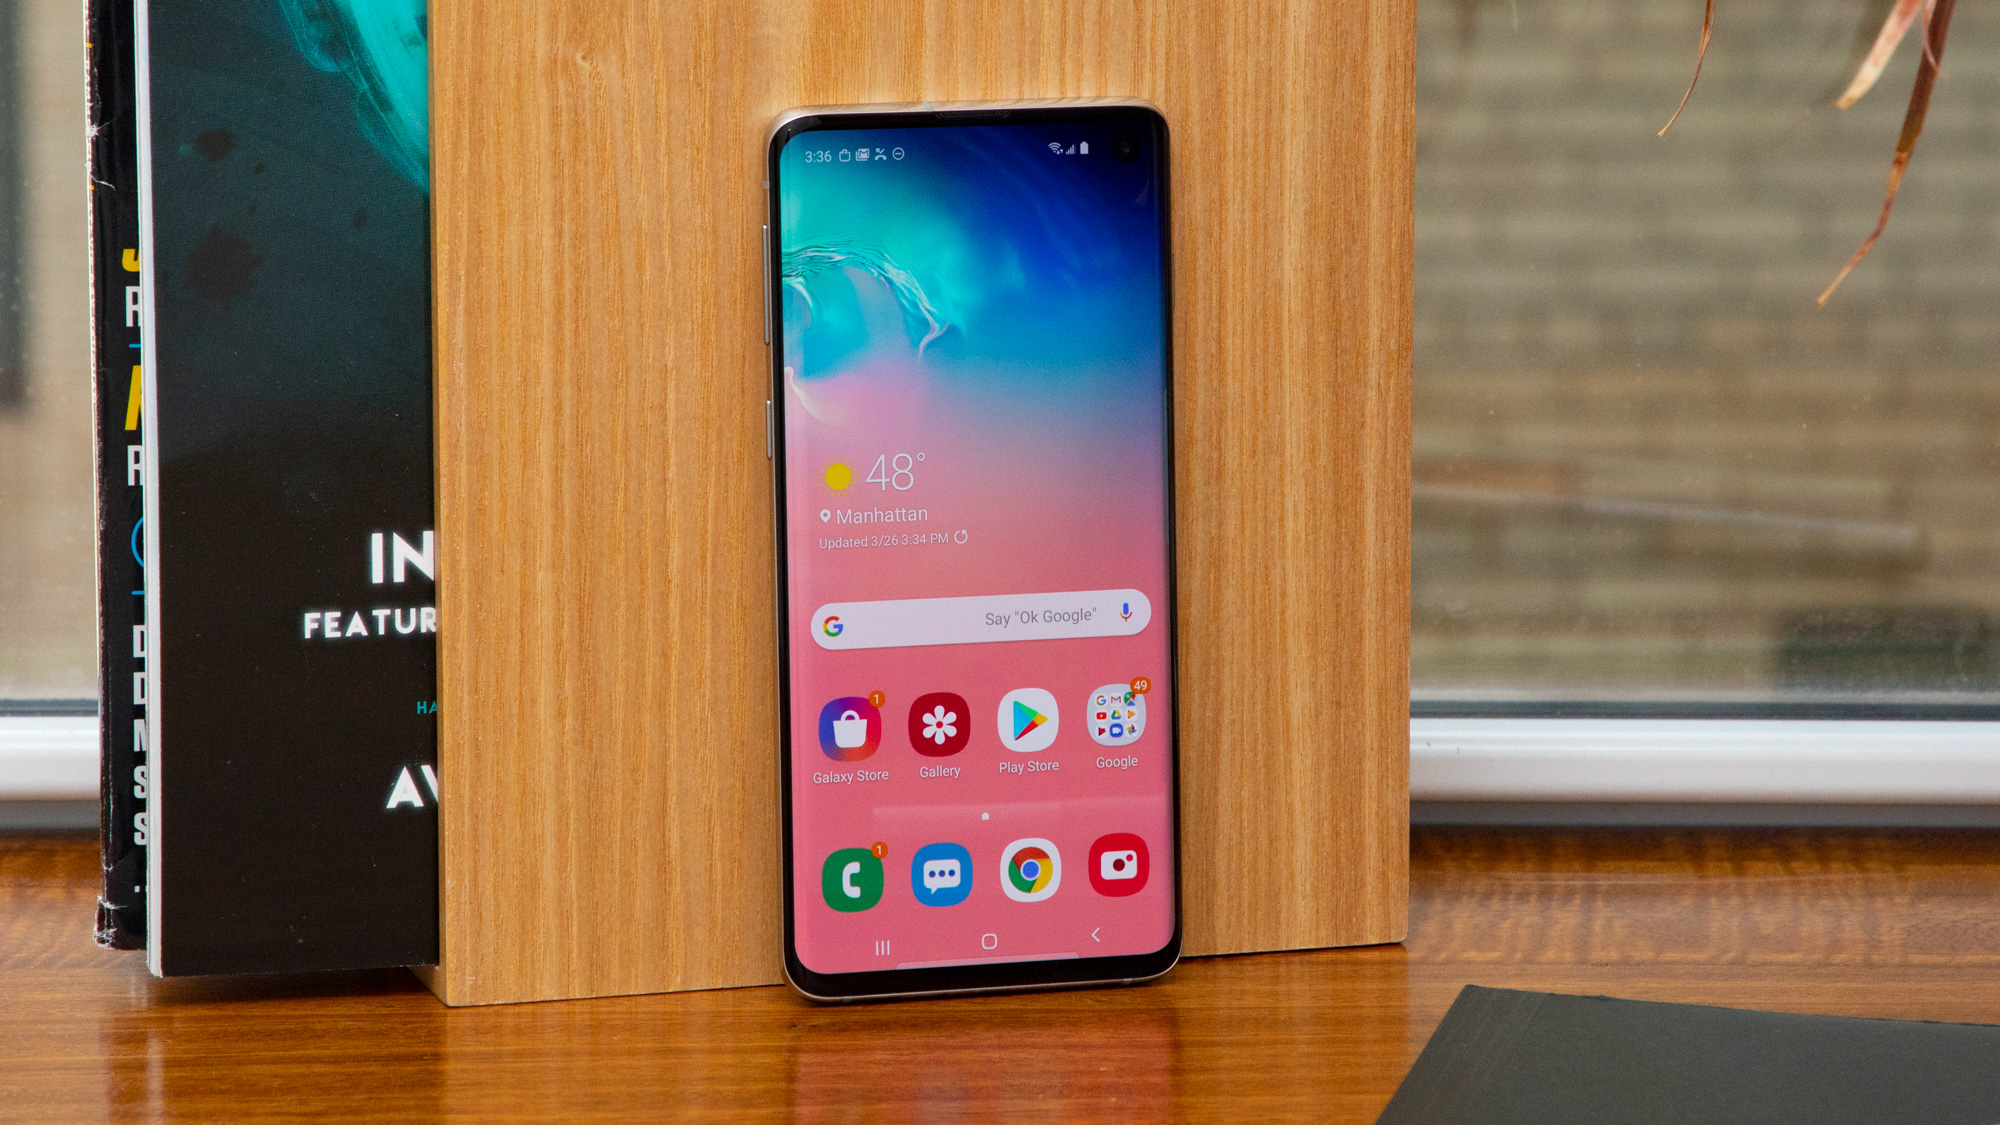 Best Android phones in UAE for 2019 which should you buy? Photo